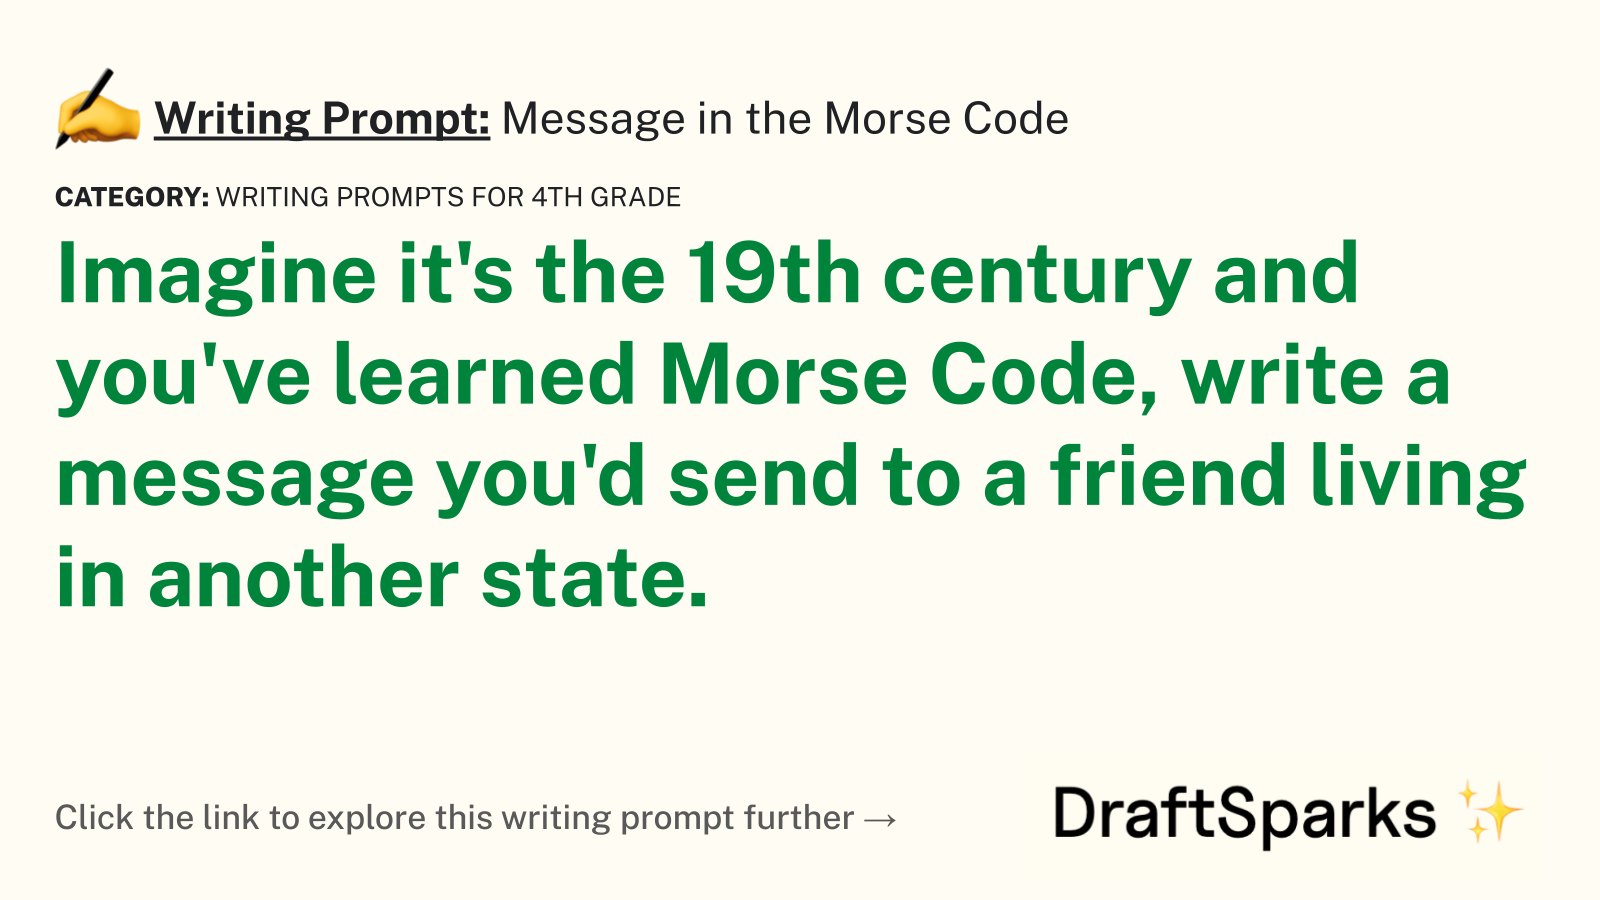 Message in the Morse Code